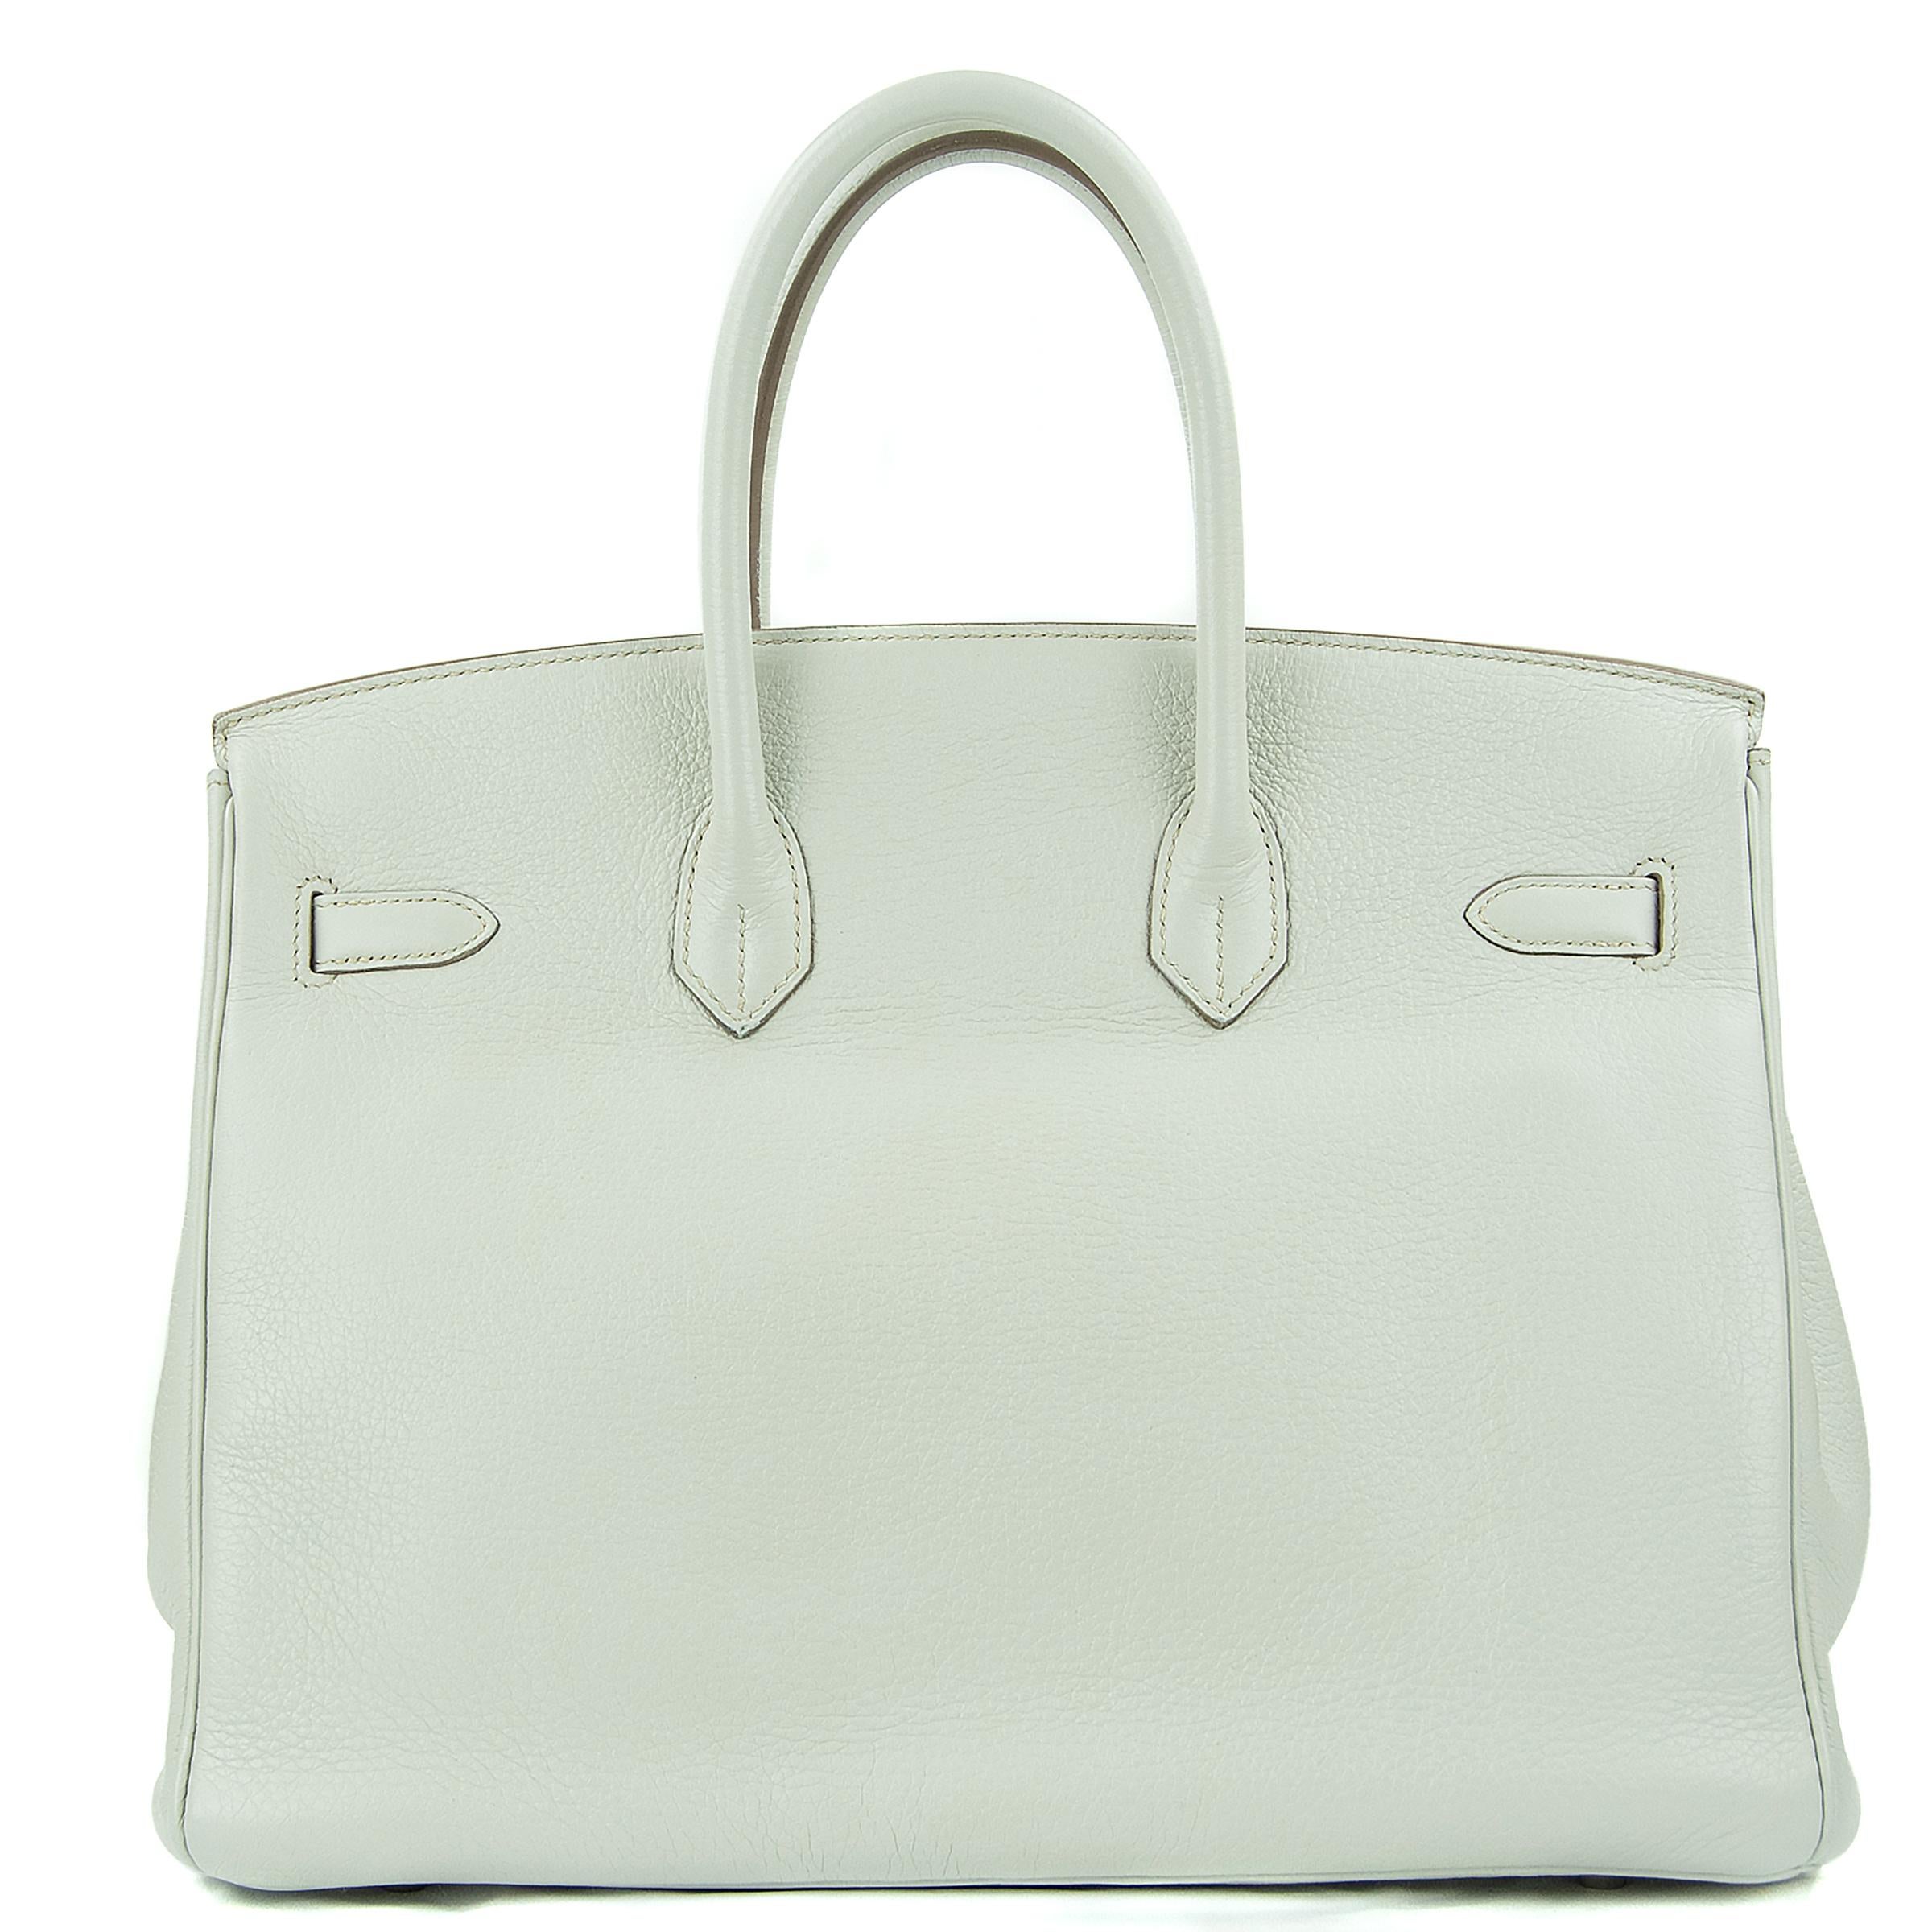 Hermes 35cm Birkin bag in Gris Perle Mykonos Lizard White Clemence. This iconic special order Hermes Birkin bag is timeless and chic. Fresh and crisp with palladium hardware.

    Condition: Excellent, Previously Used
    Made in France
    Bag